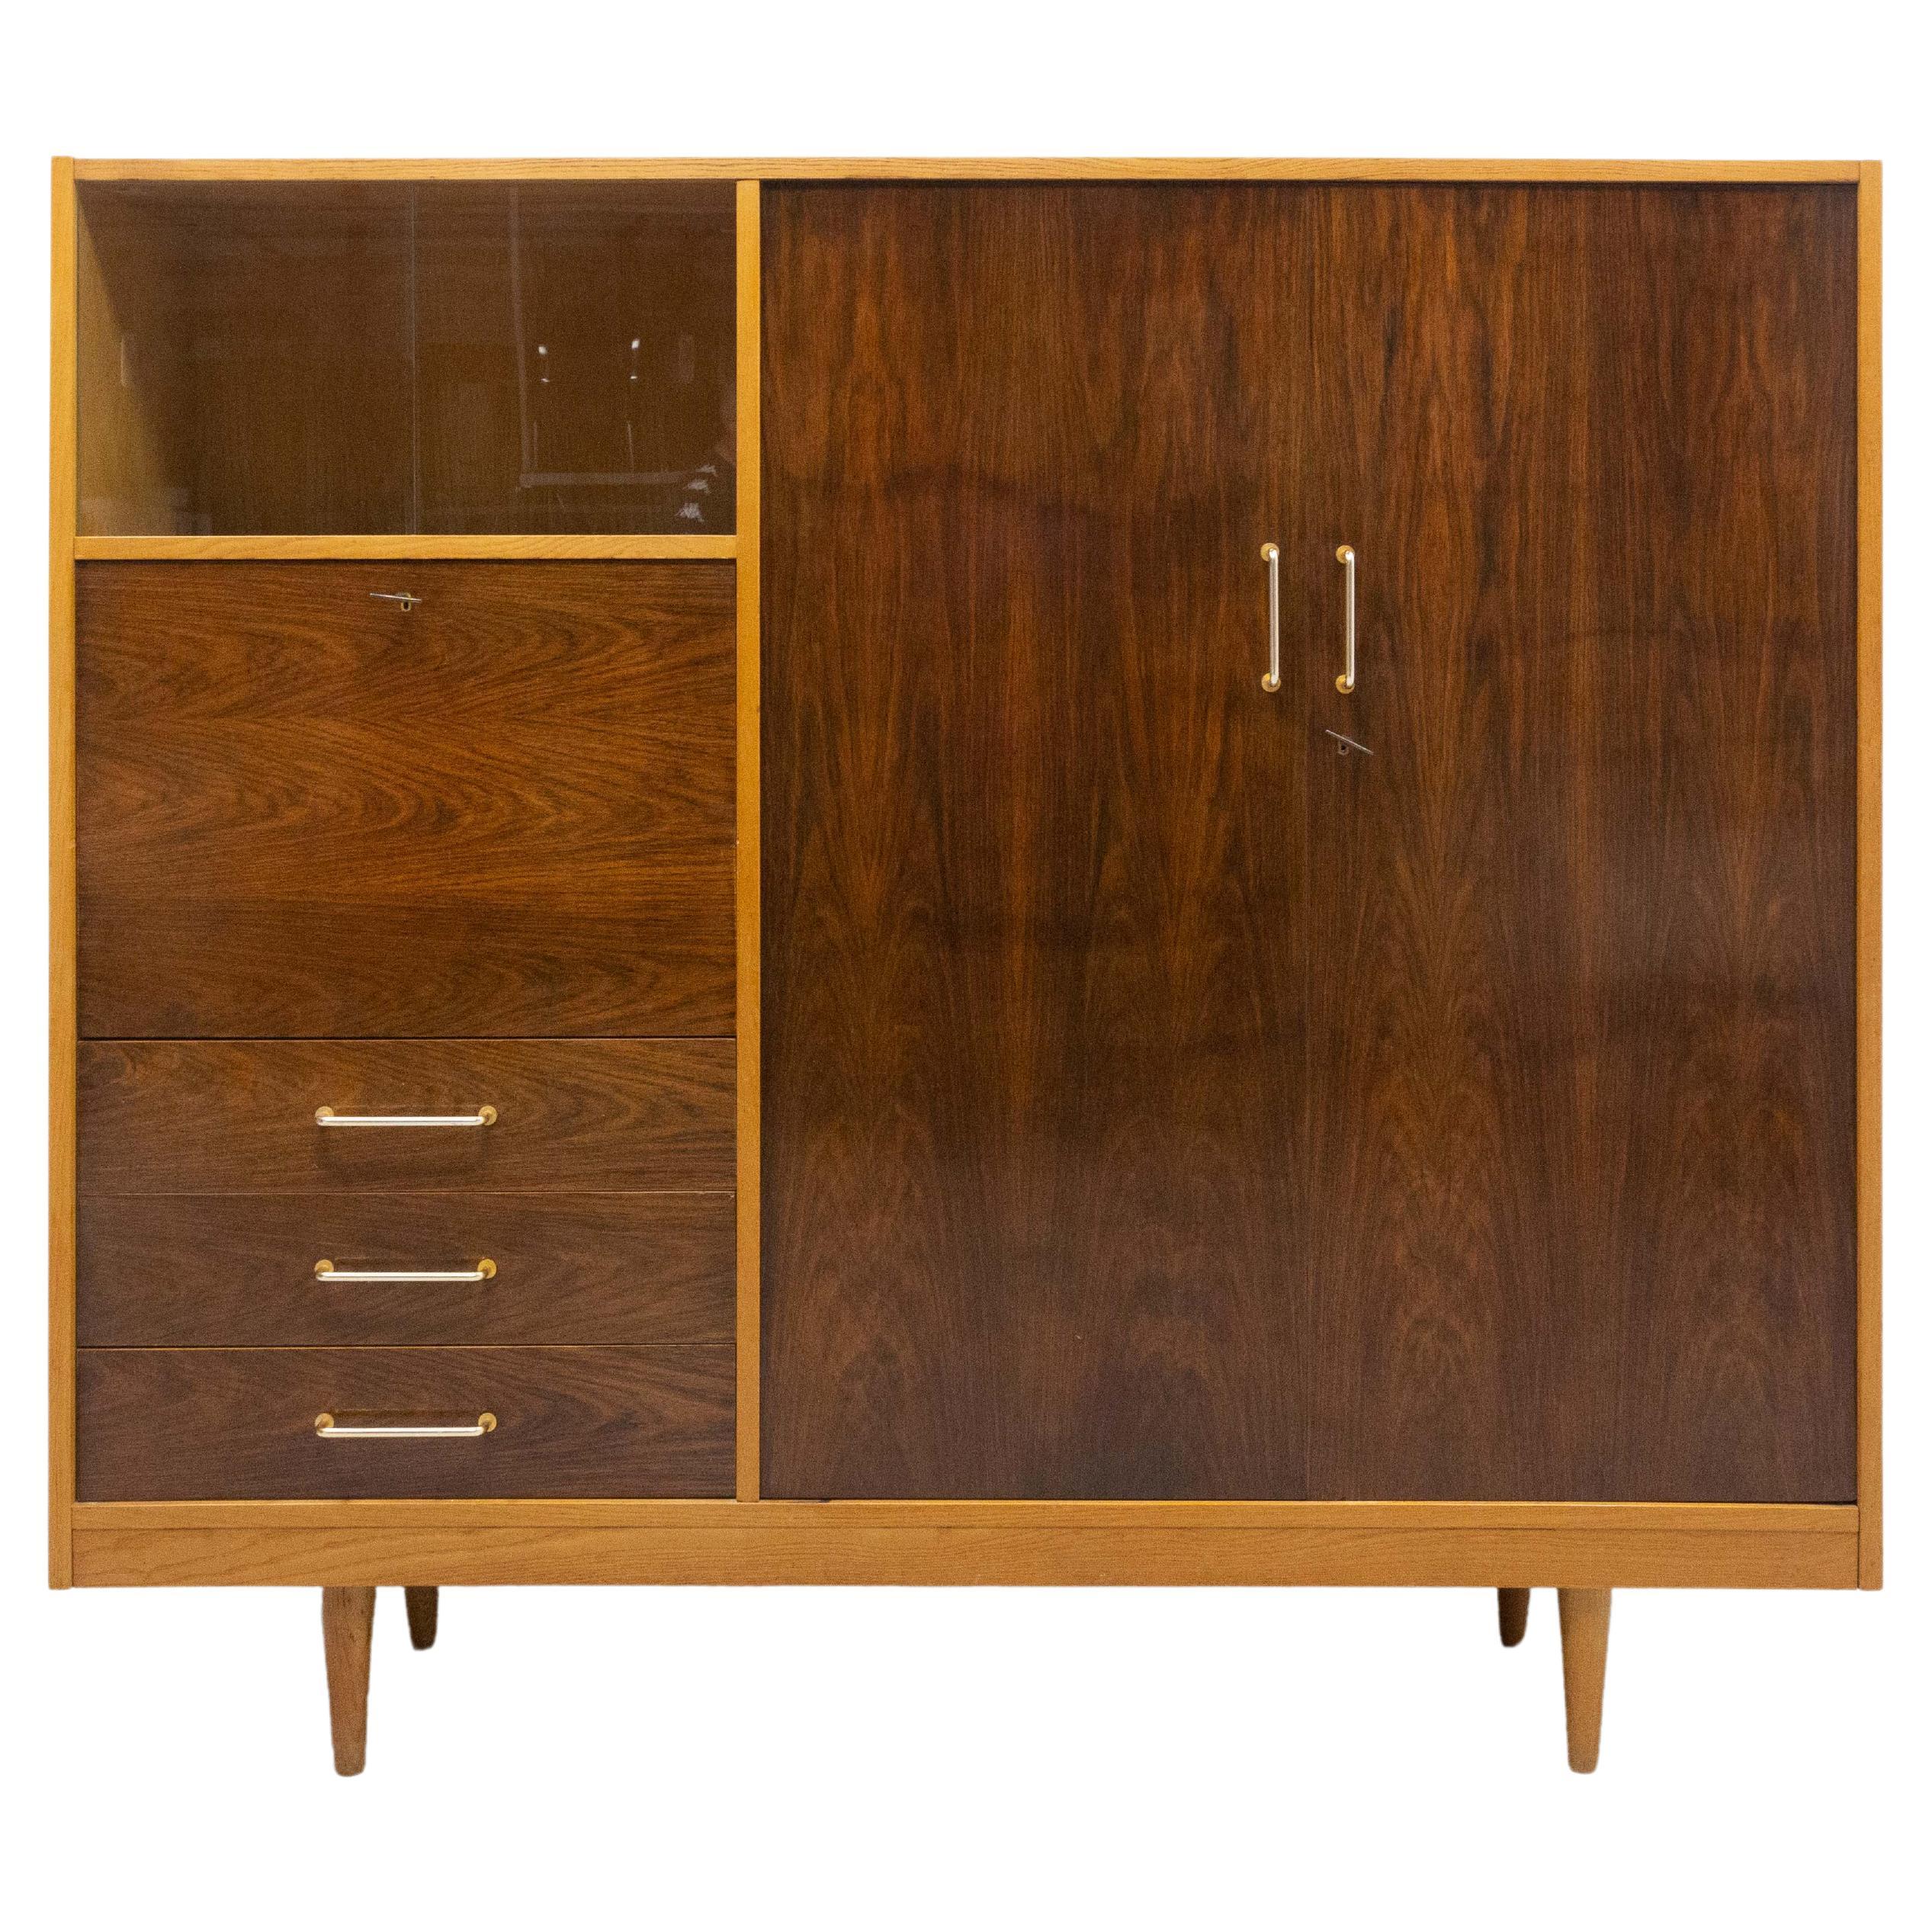 French Elm and Walnut Armoire Two Doors Wardrobe Desk and Vitrine, circa 1960